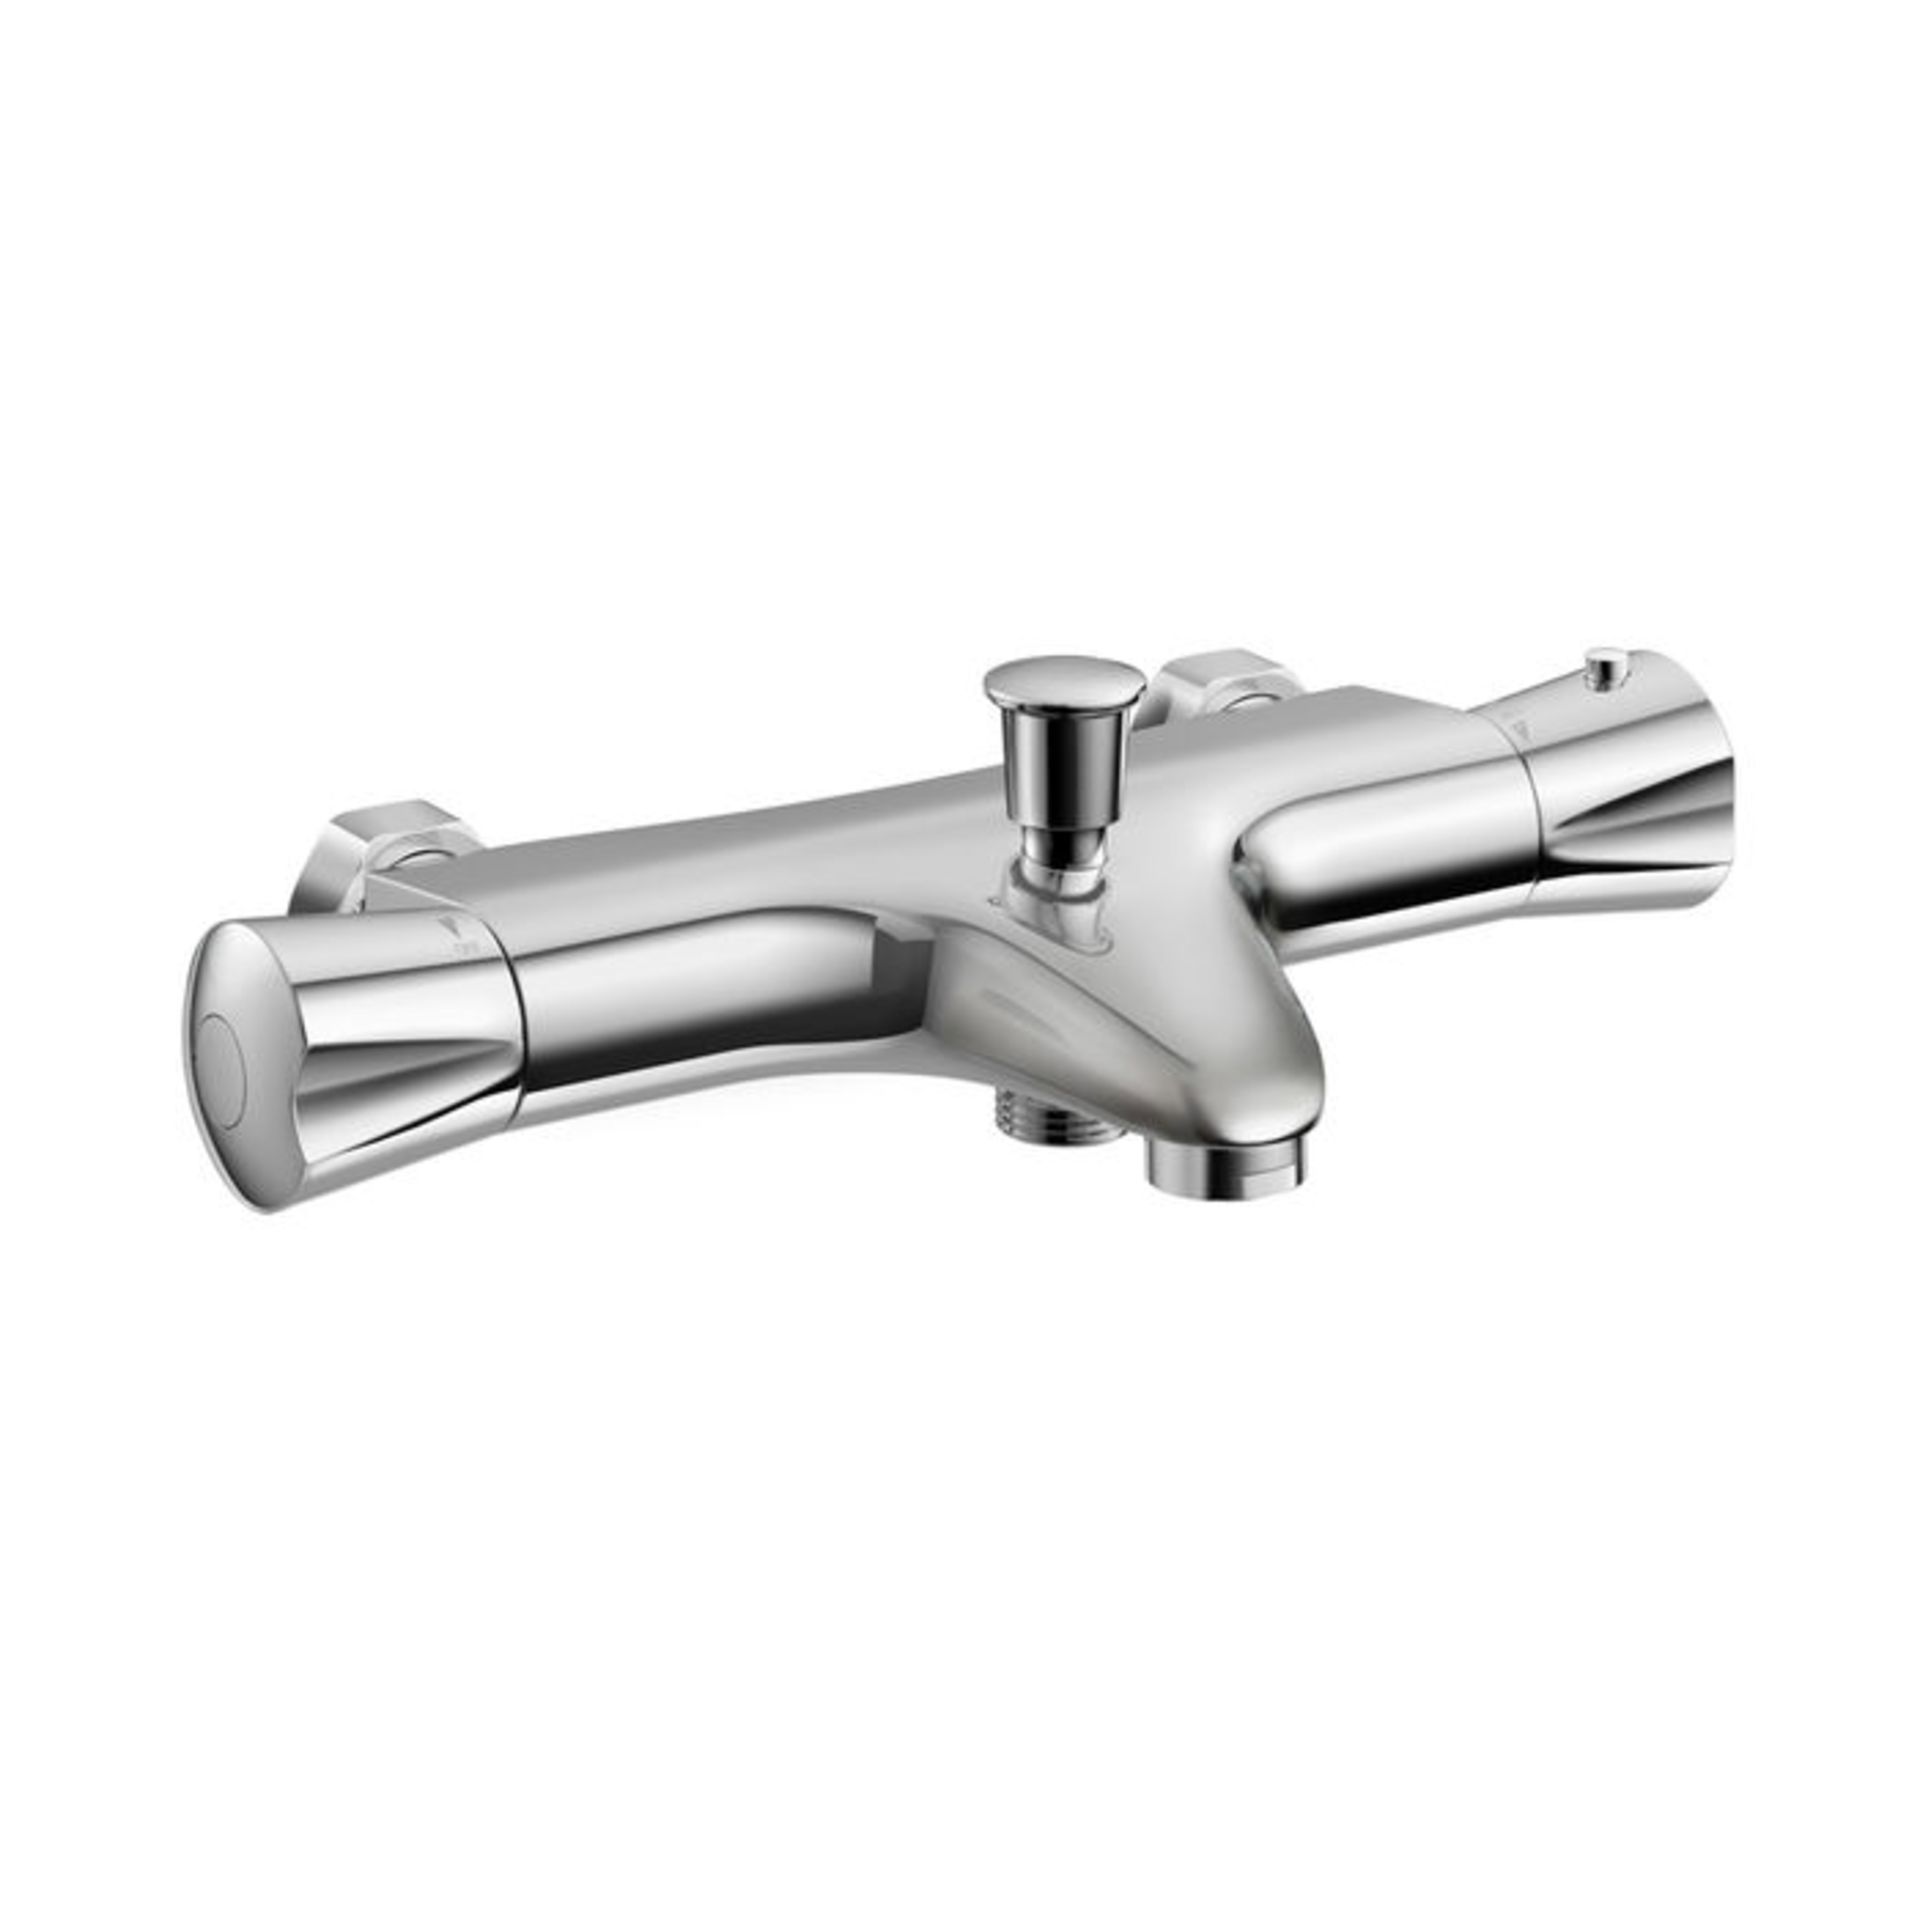 (D1015) Shower Mixer Valve with Bath Filler Chrome Plated Solid Brass Mixer Thermostatic mixe... - Image 3 of 3